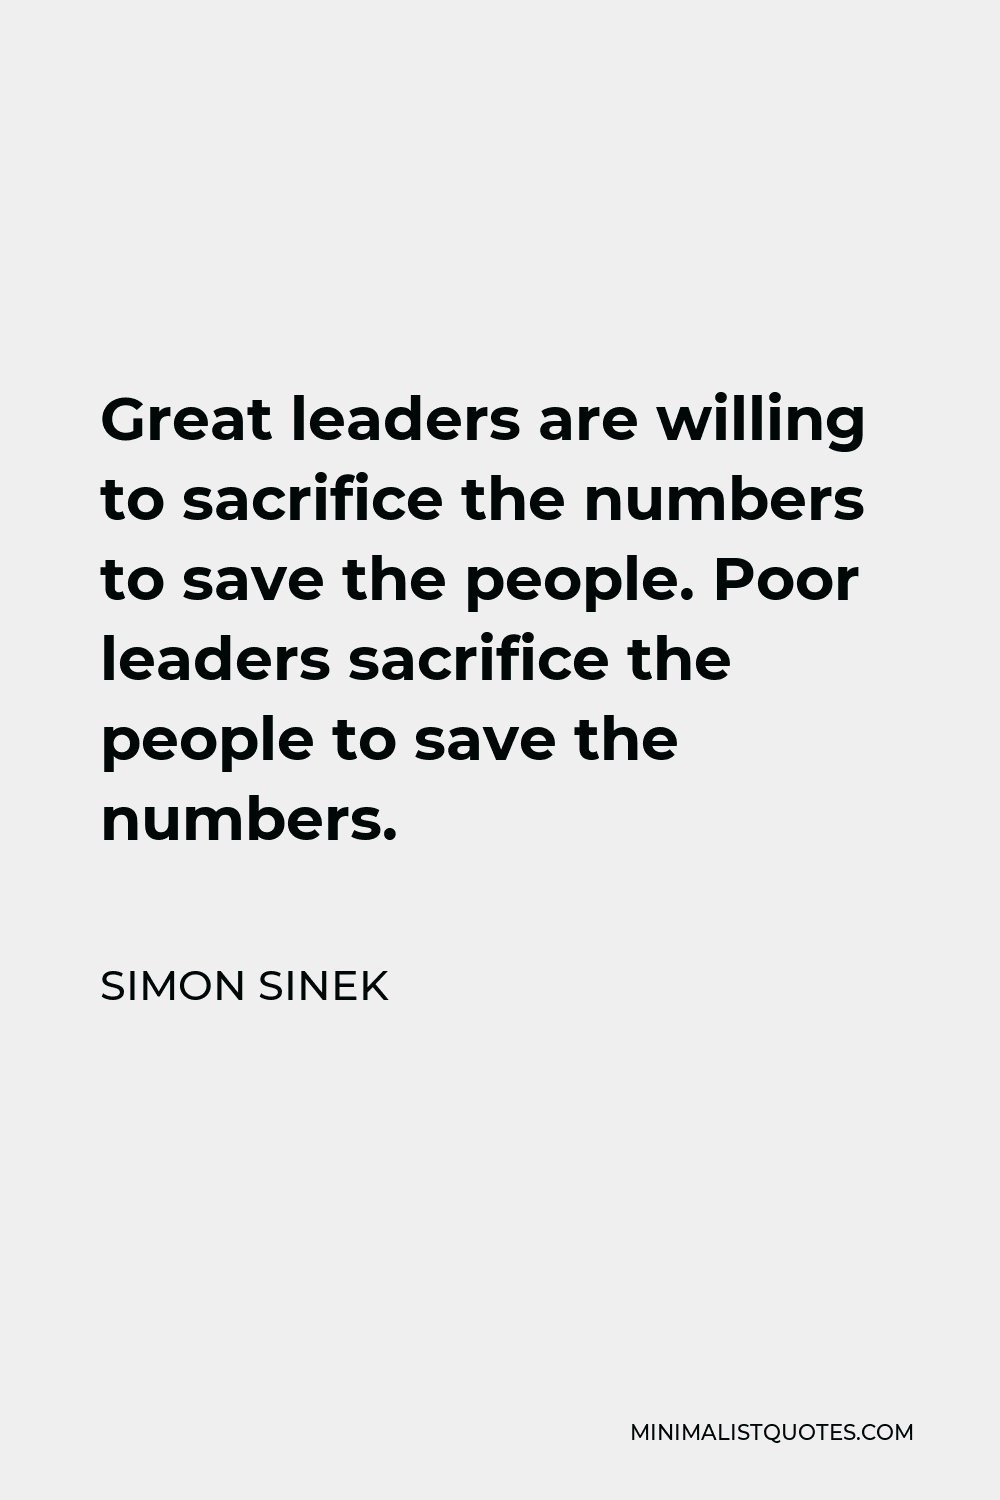 Simon Sinek Quote: Great leaders are willing to sacrifice the numbers ...